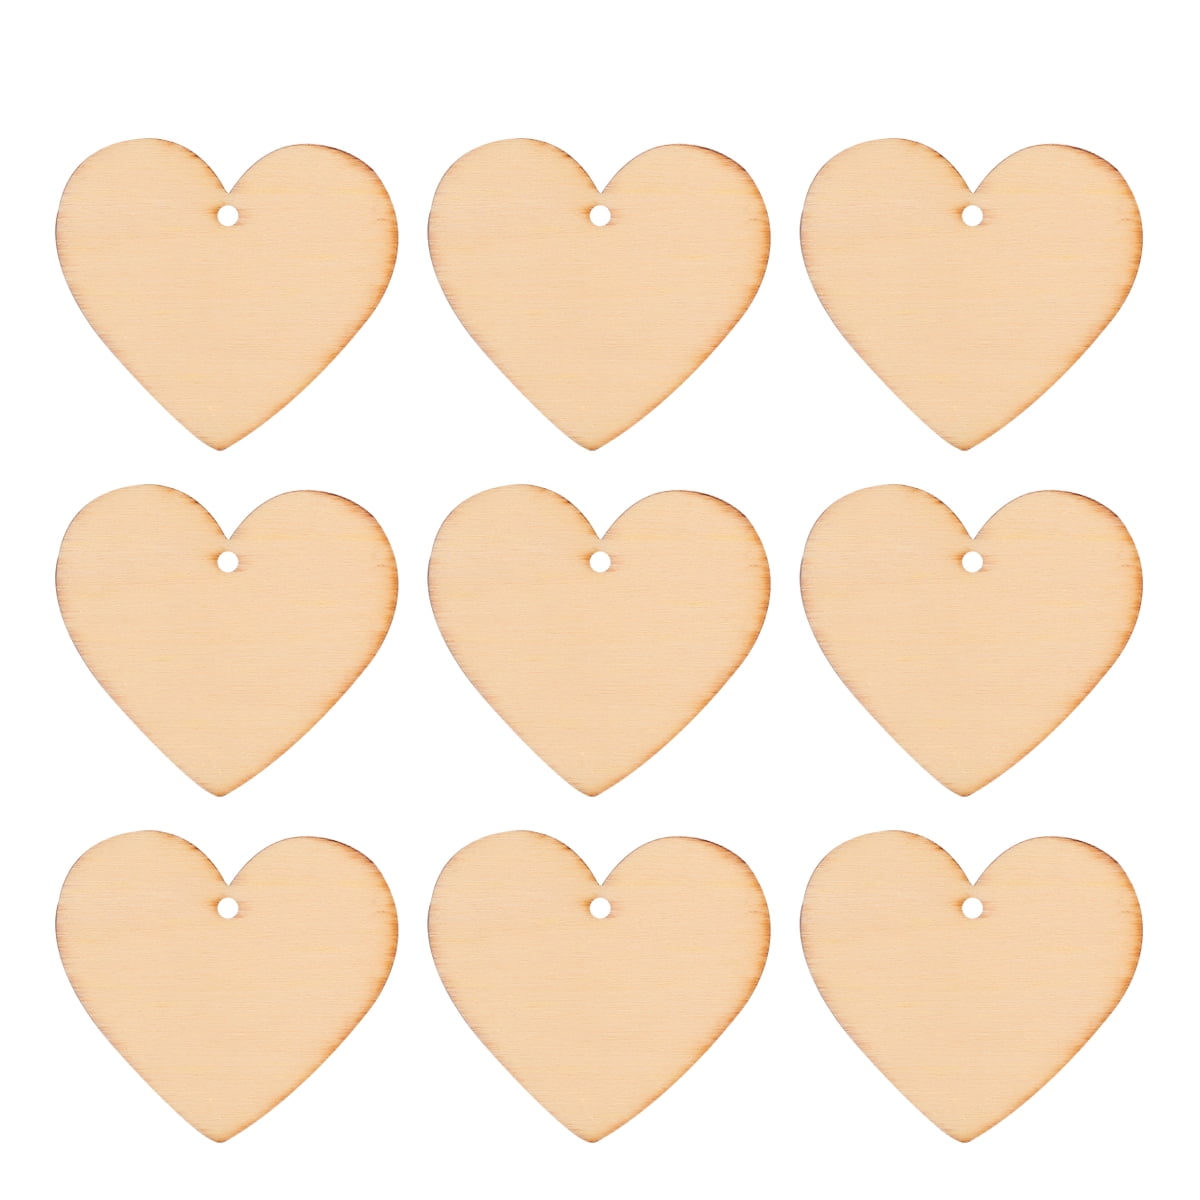 100pcs 1.5 Wooden Hearts for Crafts, Small Wood Hearts Cutout Slices, DIY Unfinished Wooden Ornaments Embellishments, Heart Sign Tag for